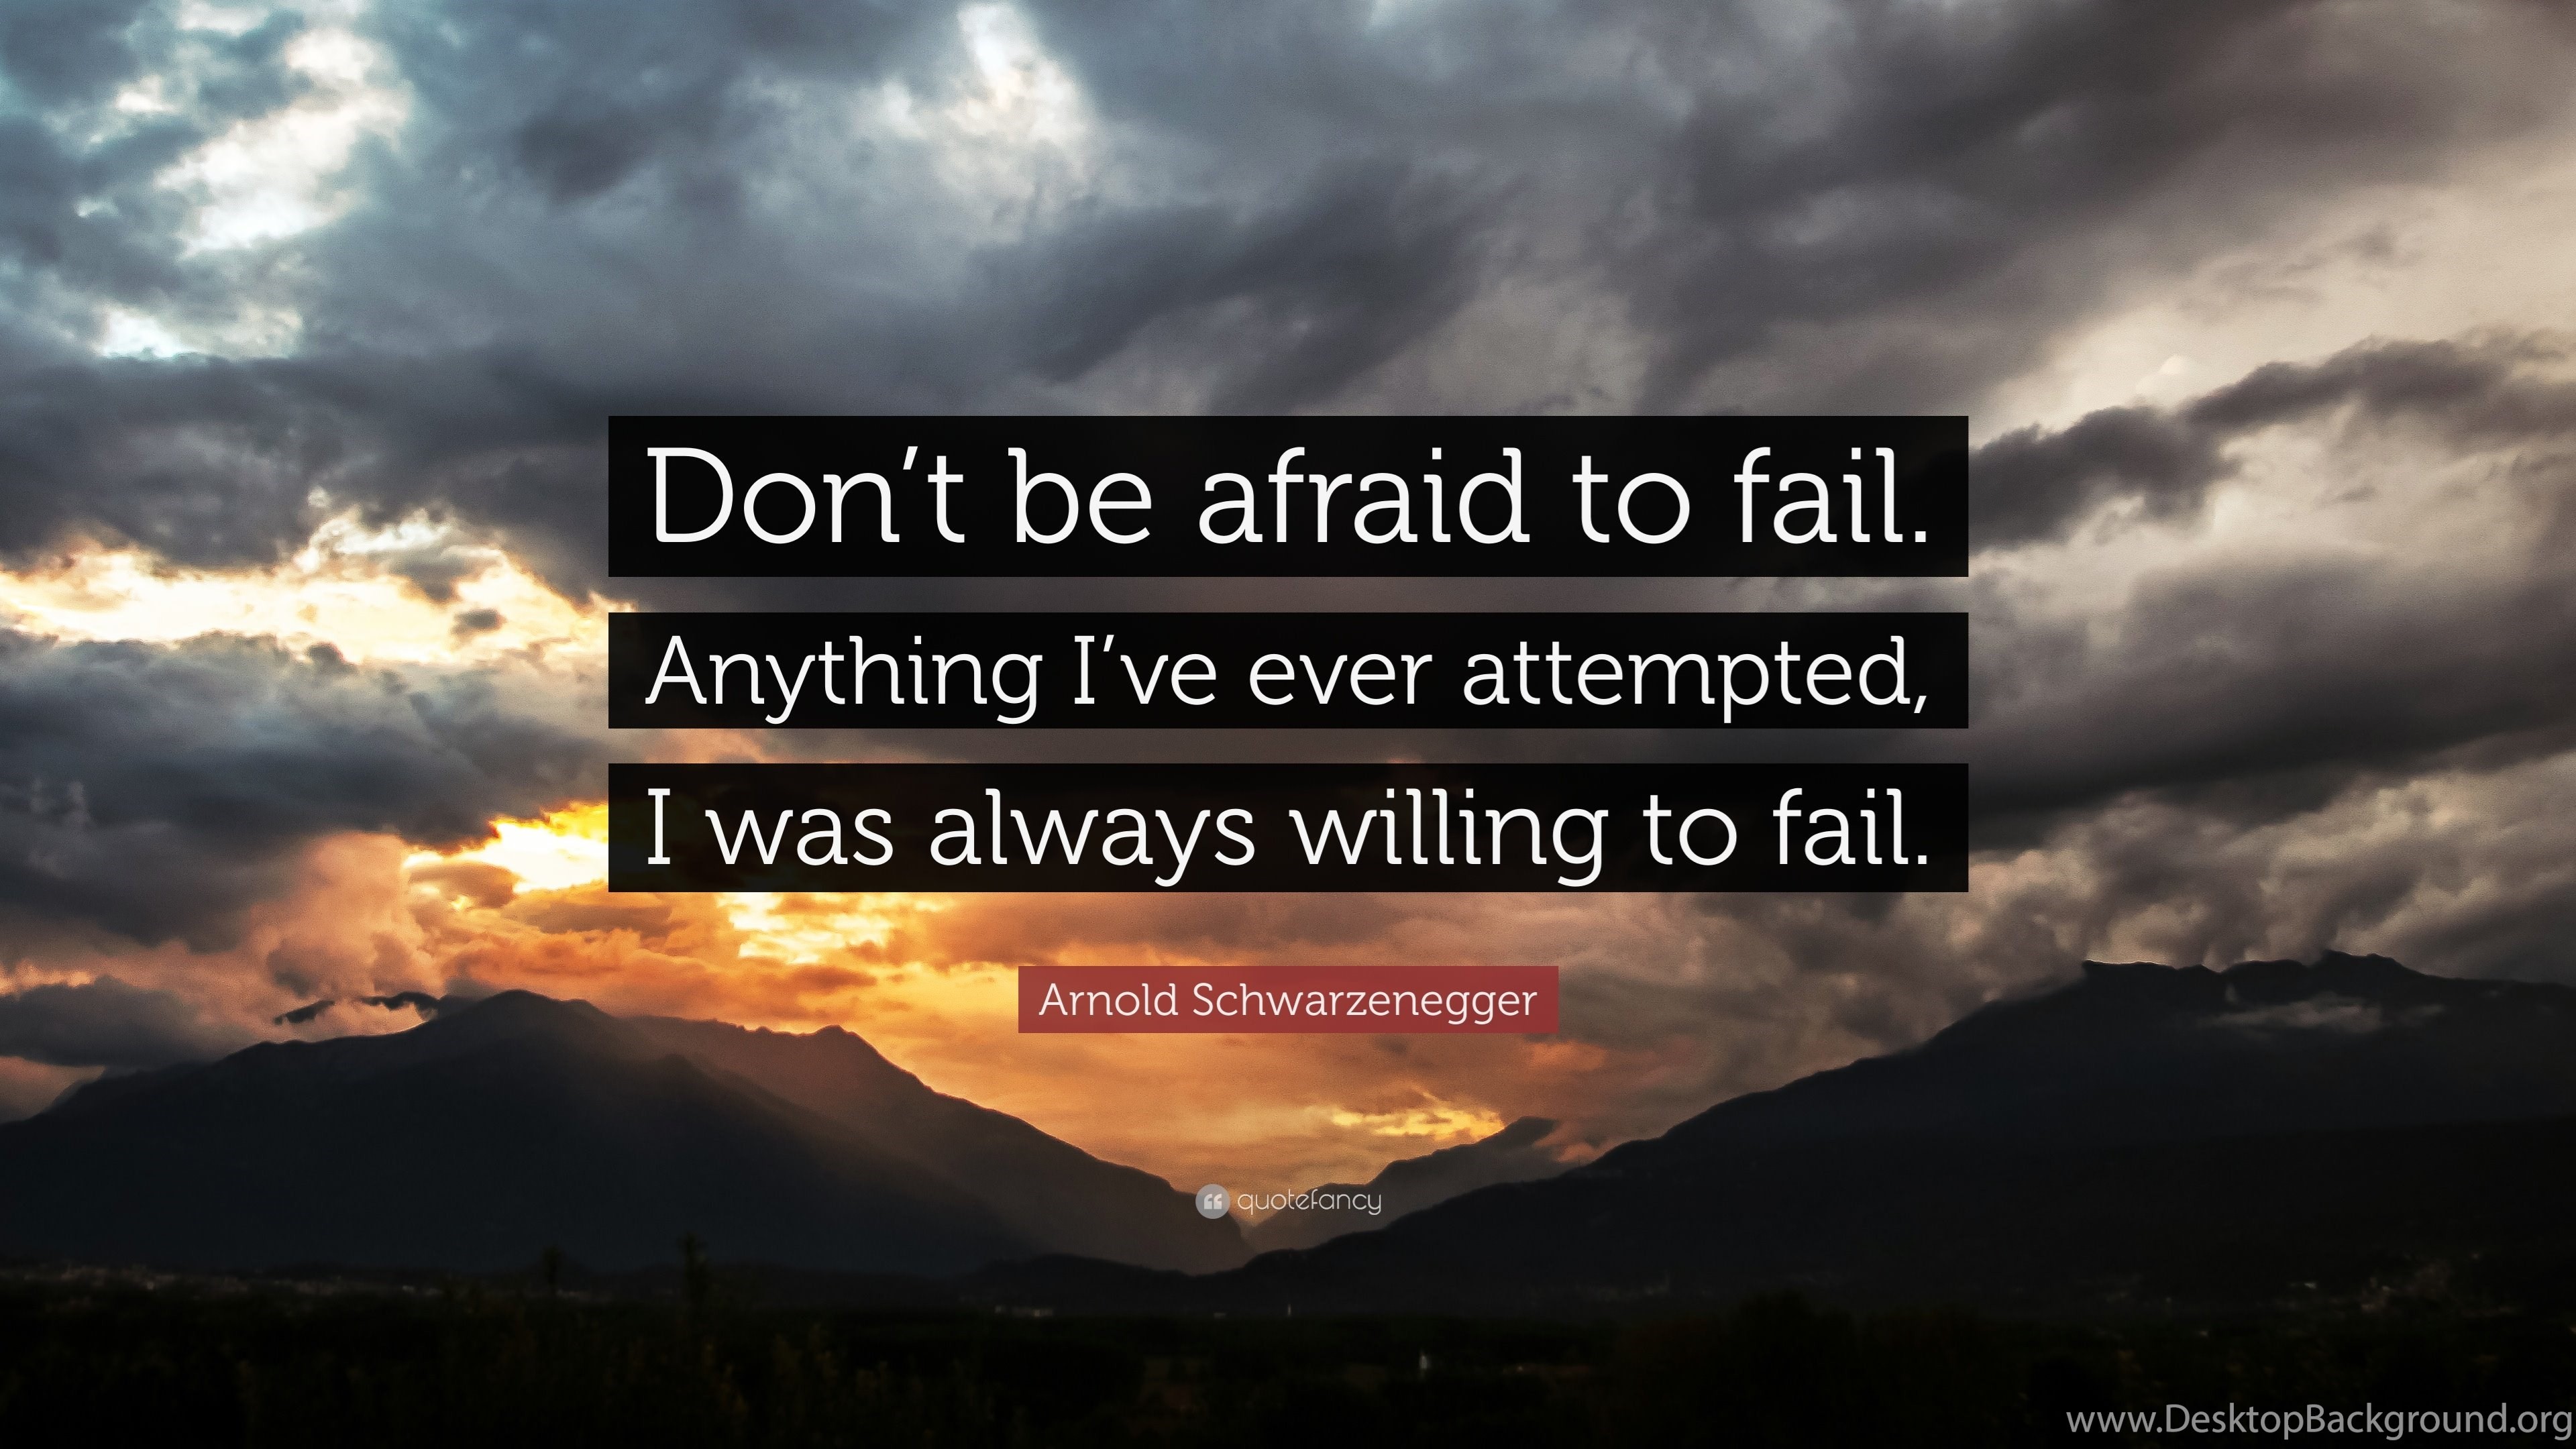 3840x2160 wallpapers with inspiring quotes - quotefancy wallpapers with inspirational  quotes desktop background